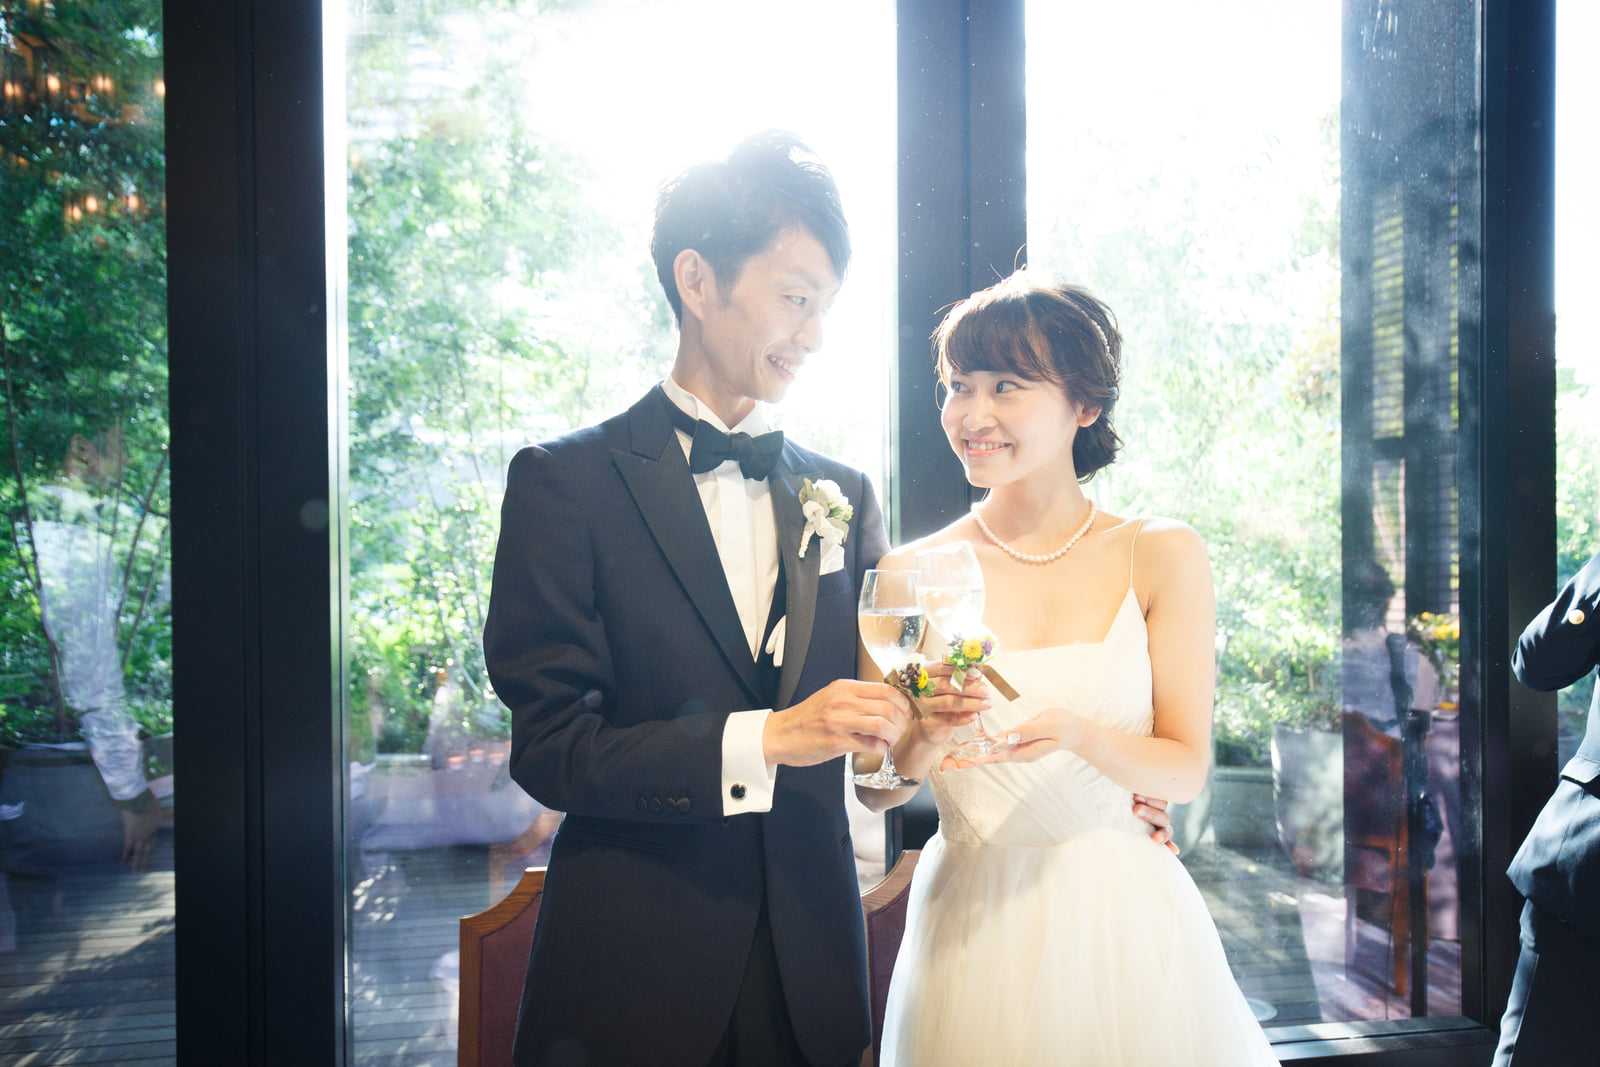 SHOHEI & EMIKO [Summer Wedding] Warm and close wedding ceremony full of natural light and greenery